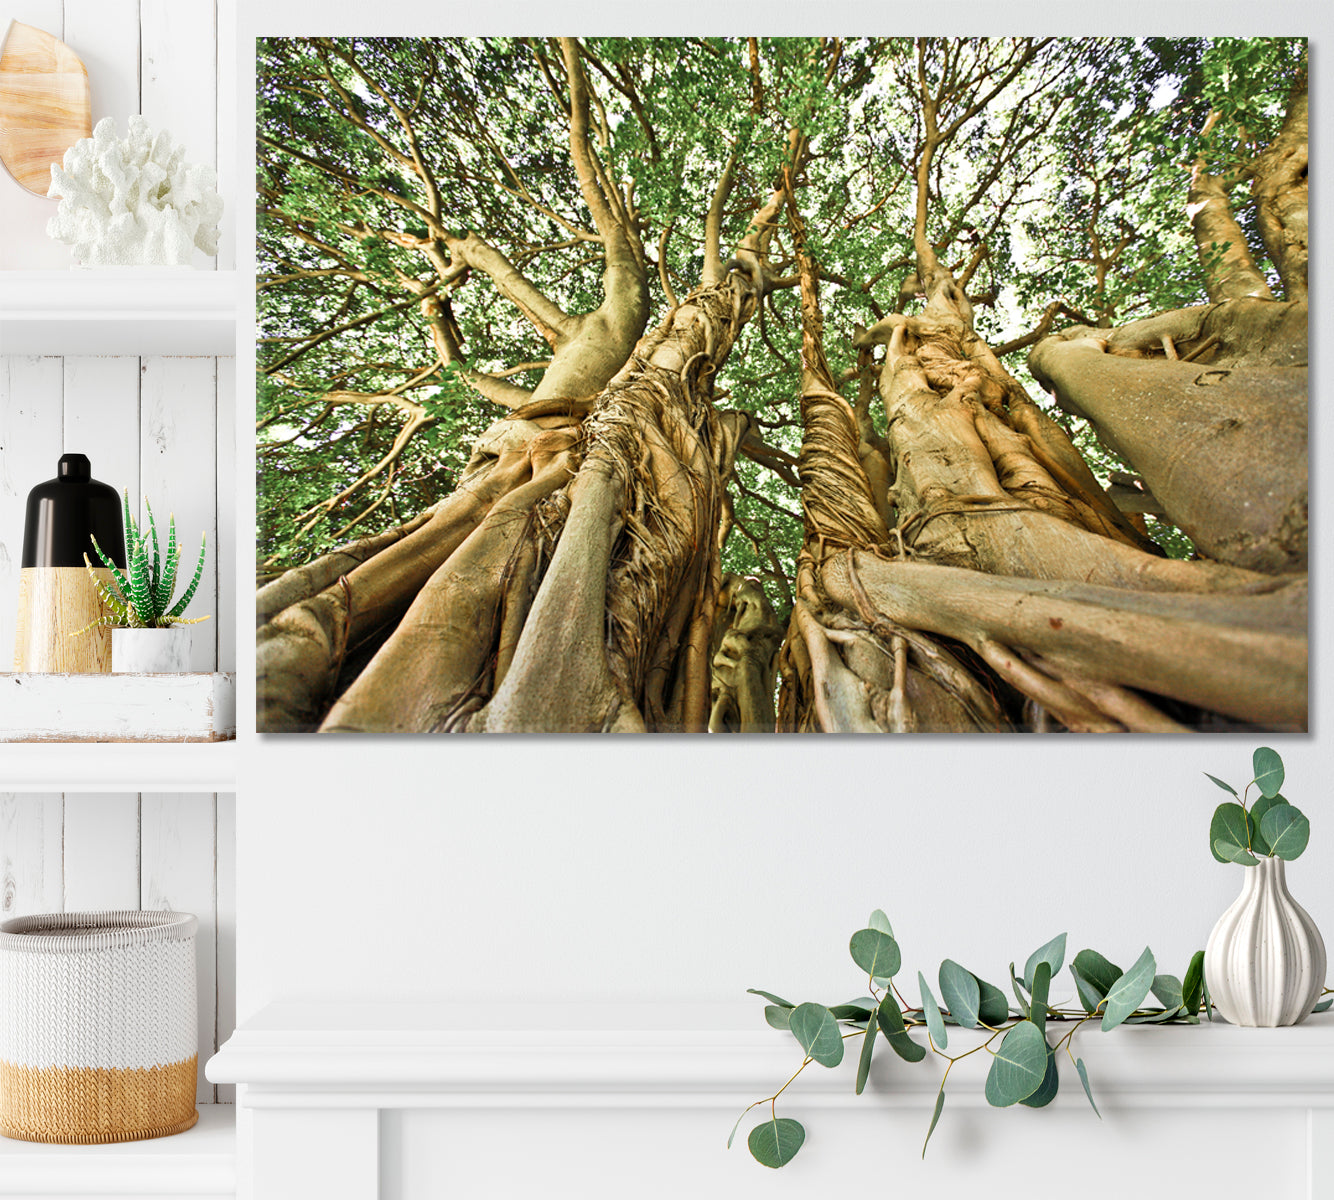 UNIQUE TREE FORMATION Giant Old Tree Africa Forest Huge Baobab Nature Wall Canvas Print Artesty   